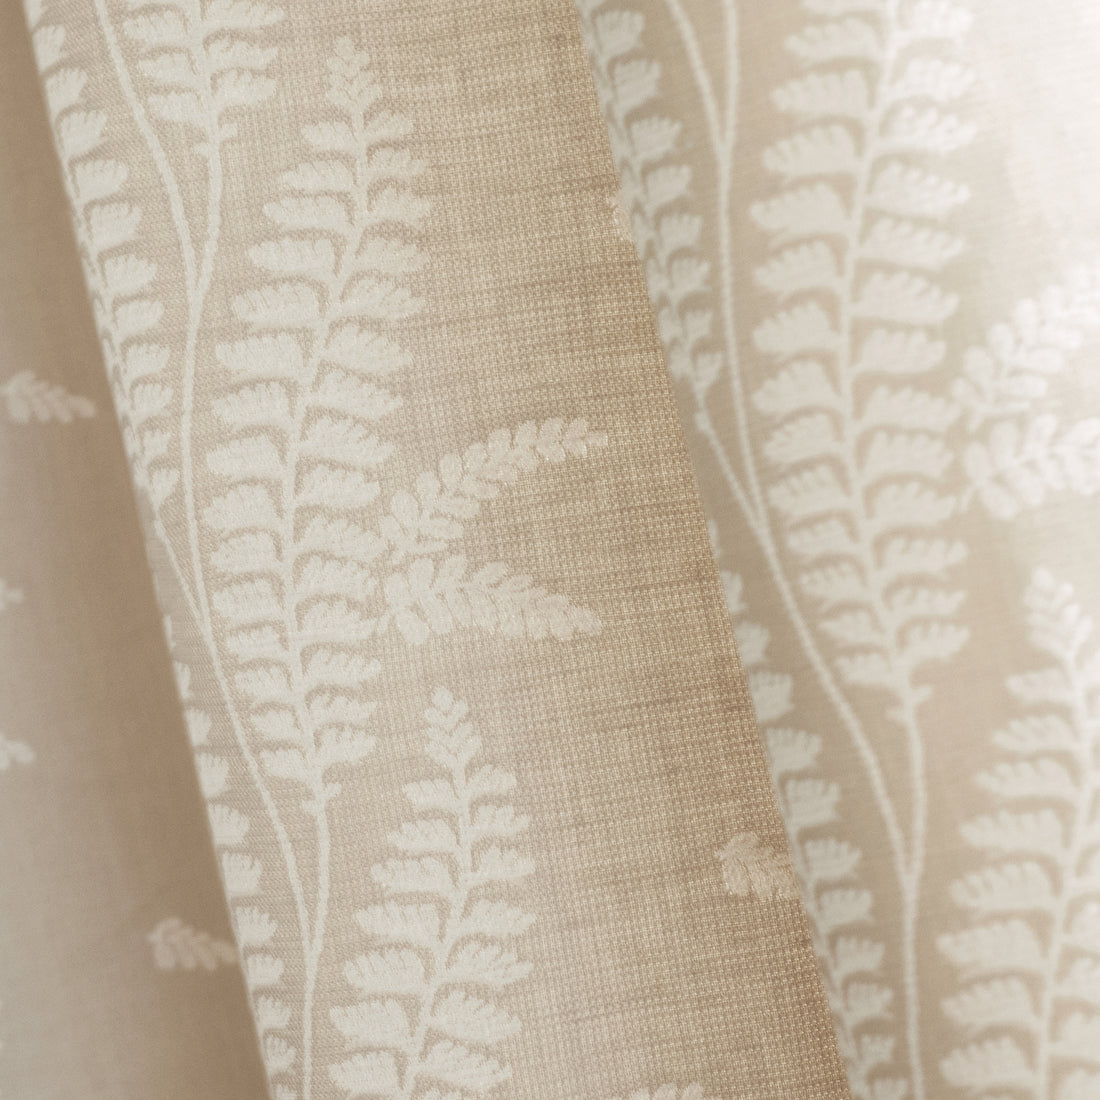 Detailed view of Ensbury Fern woven fabric in beige color variant by Anna French in the Bristol collection - pattern number AW57824